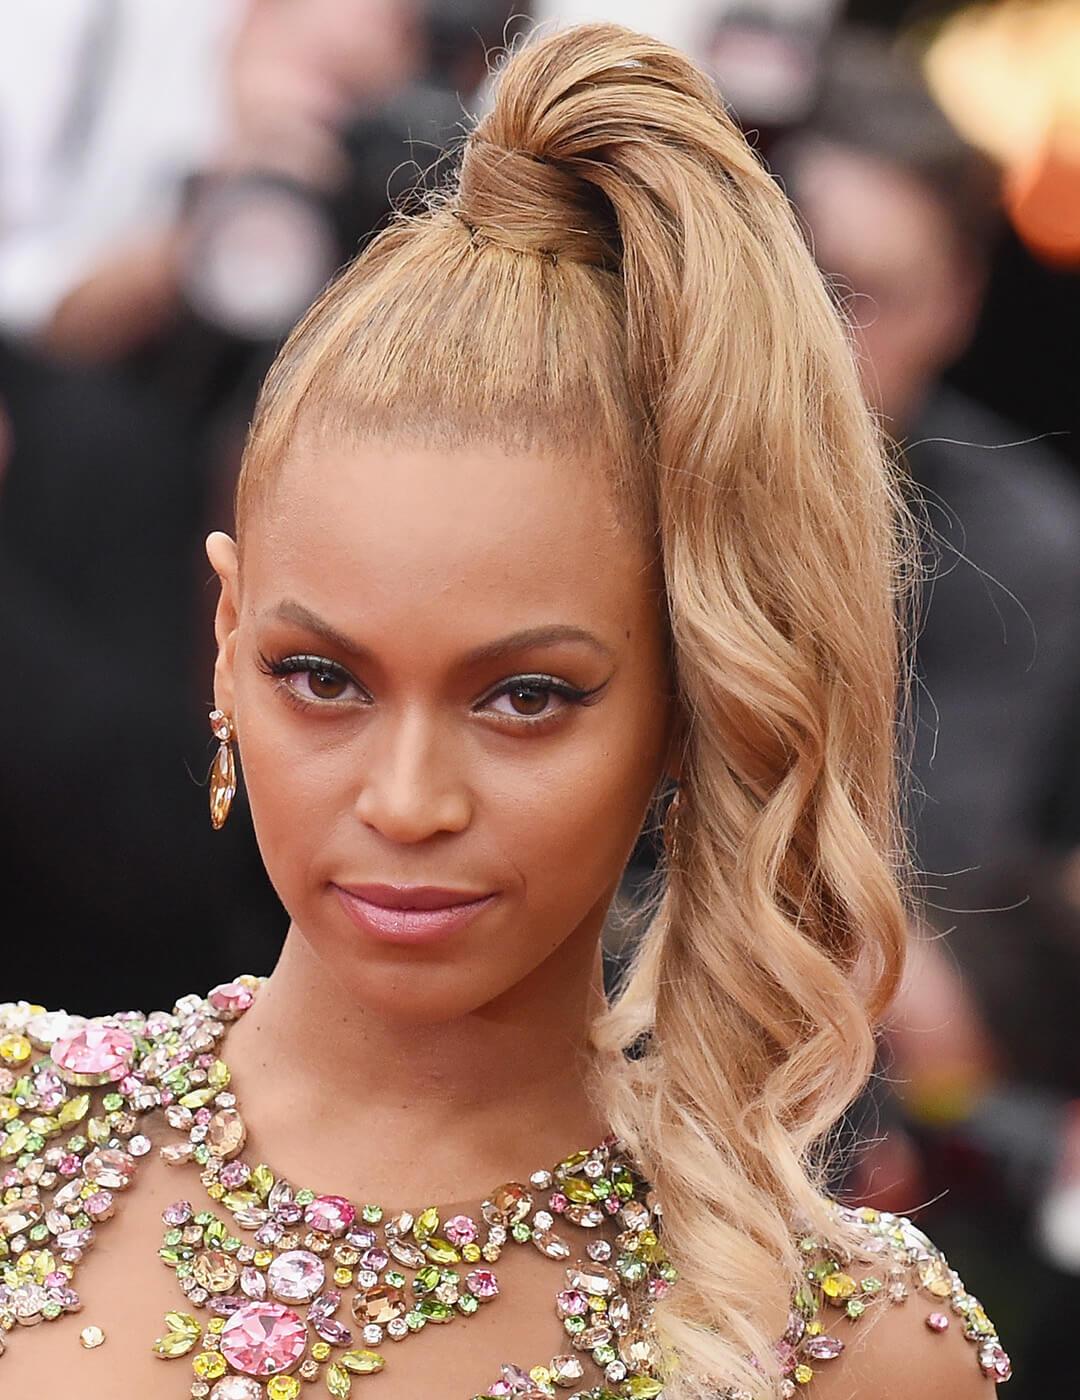 A close-up image of Beyonce wearing a dress accentuated with colorful beads with her hair on one side